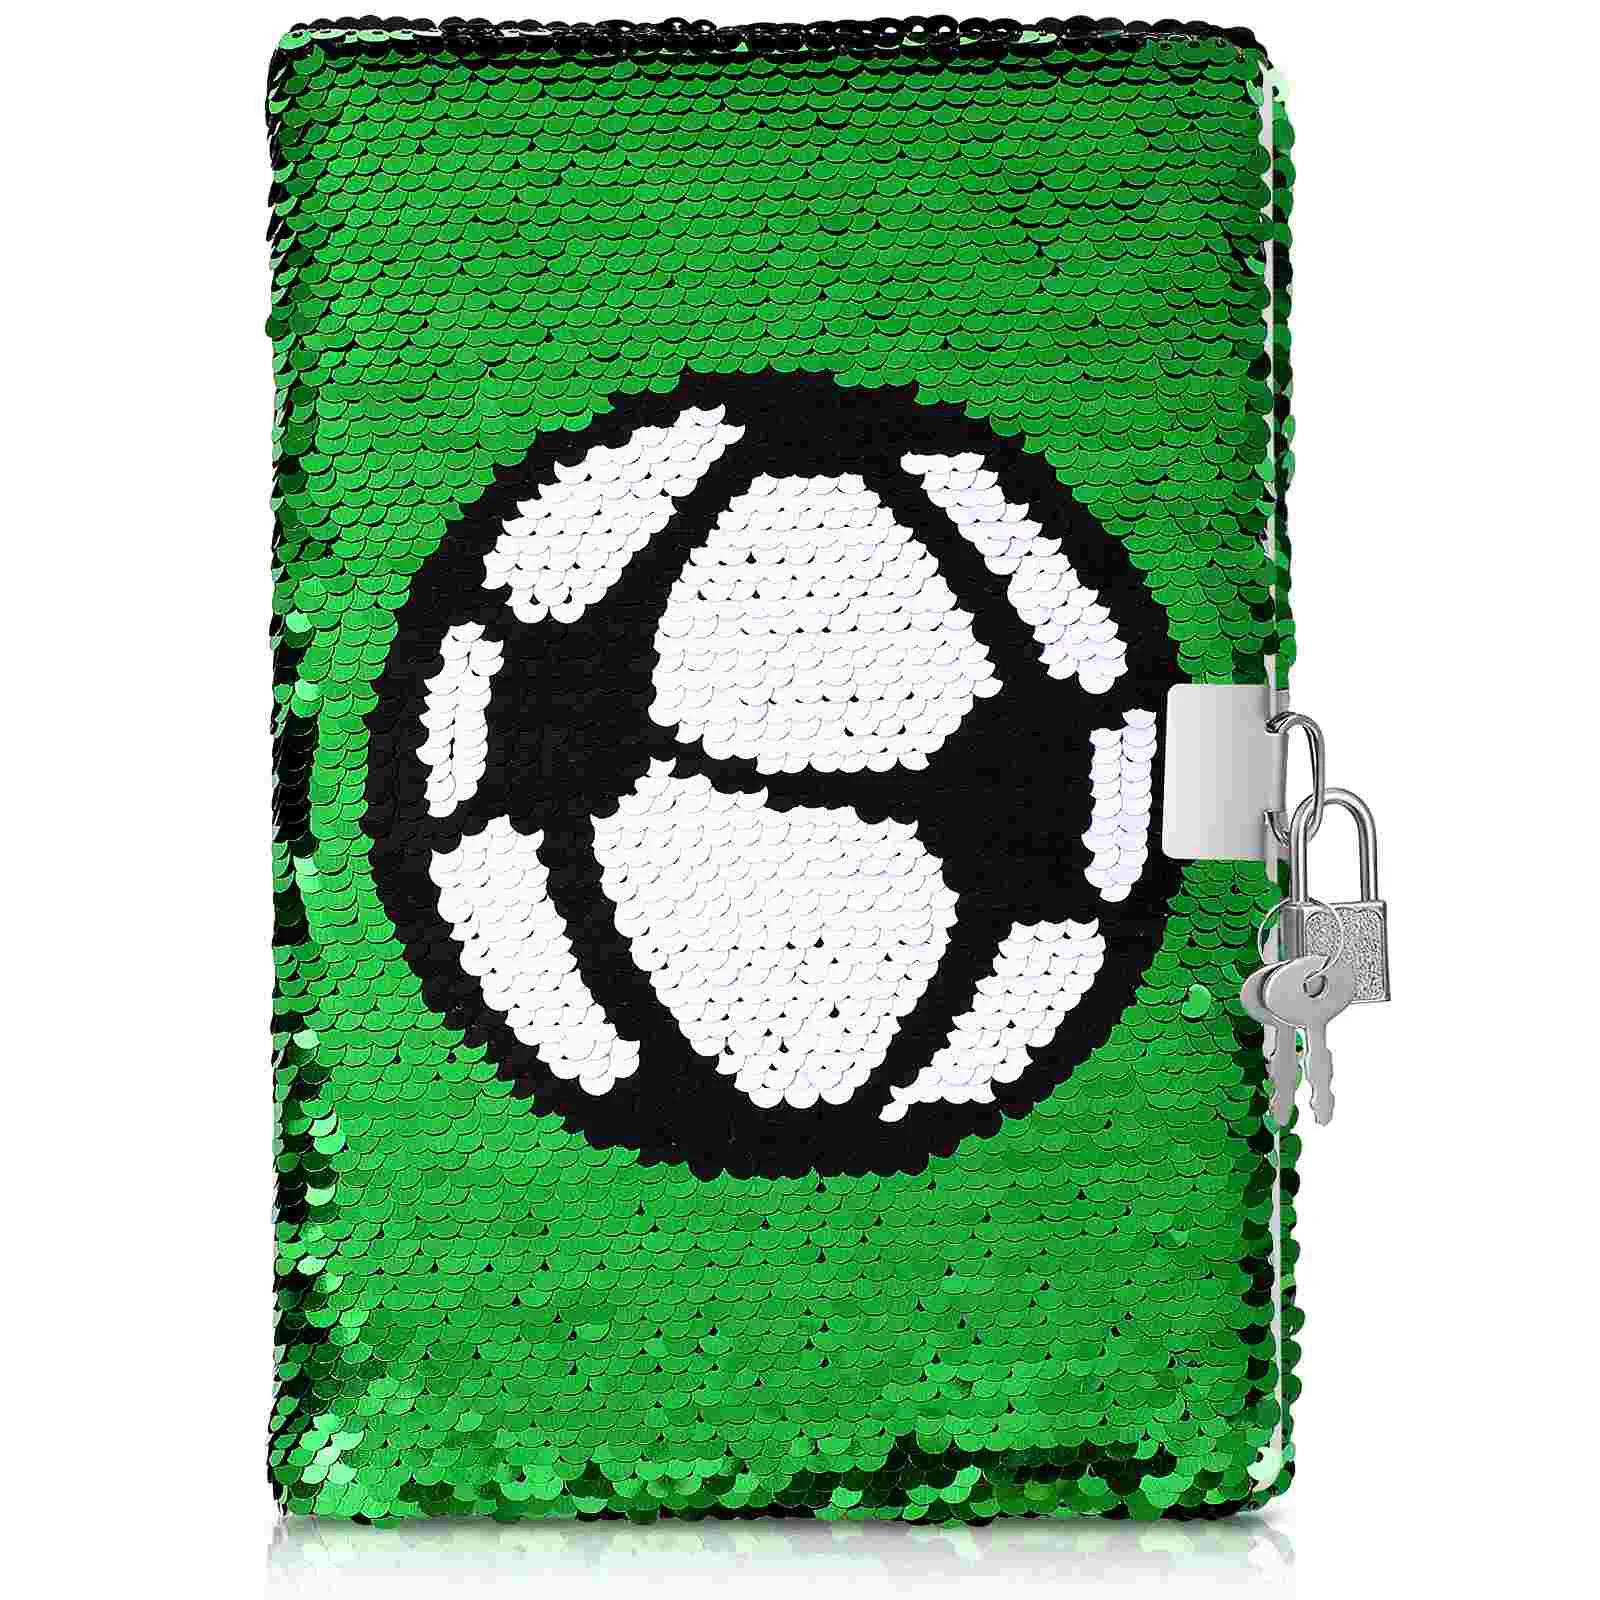 

Sequin Notebook Reversible Football Pattern Notebook with Lock and Keys Diary Journal Travel Notebook Diary for Kids and Adults